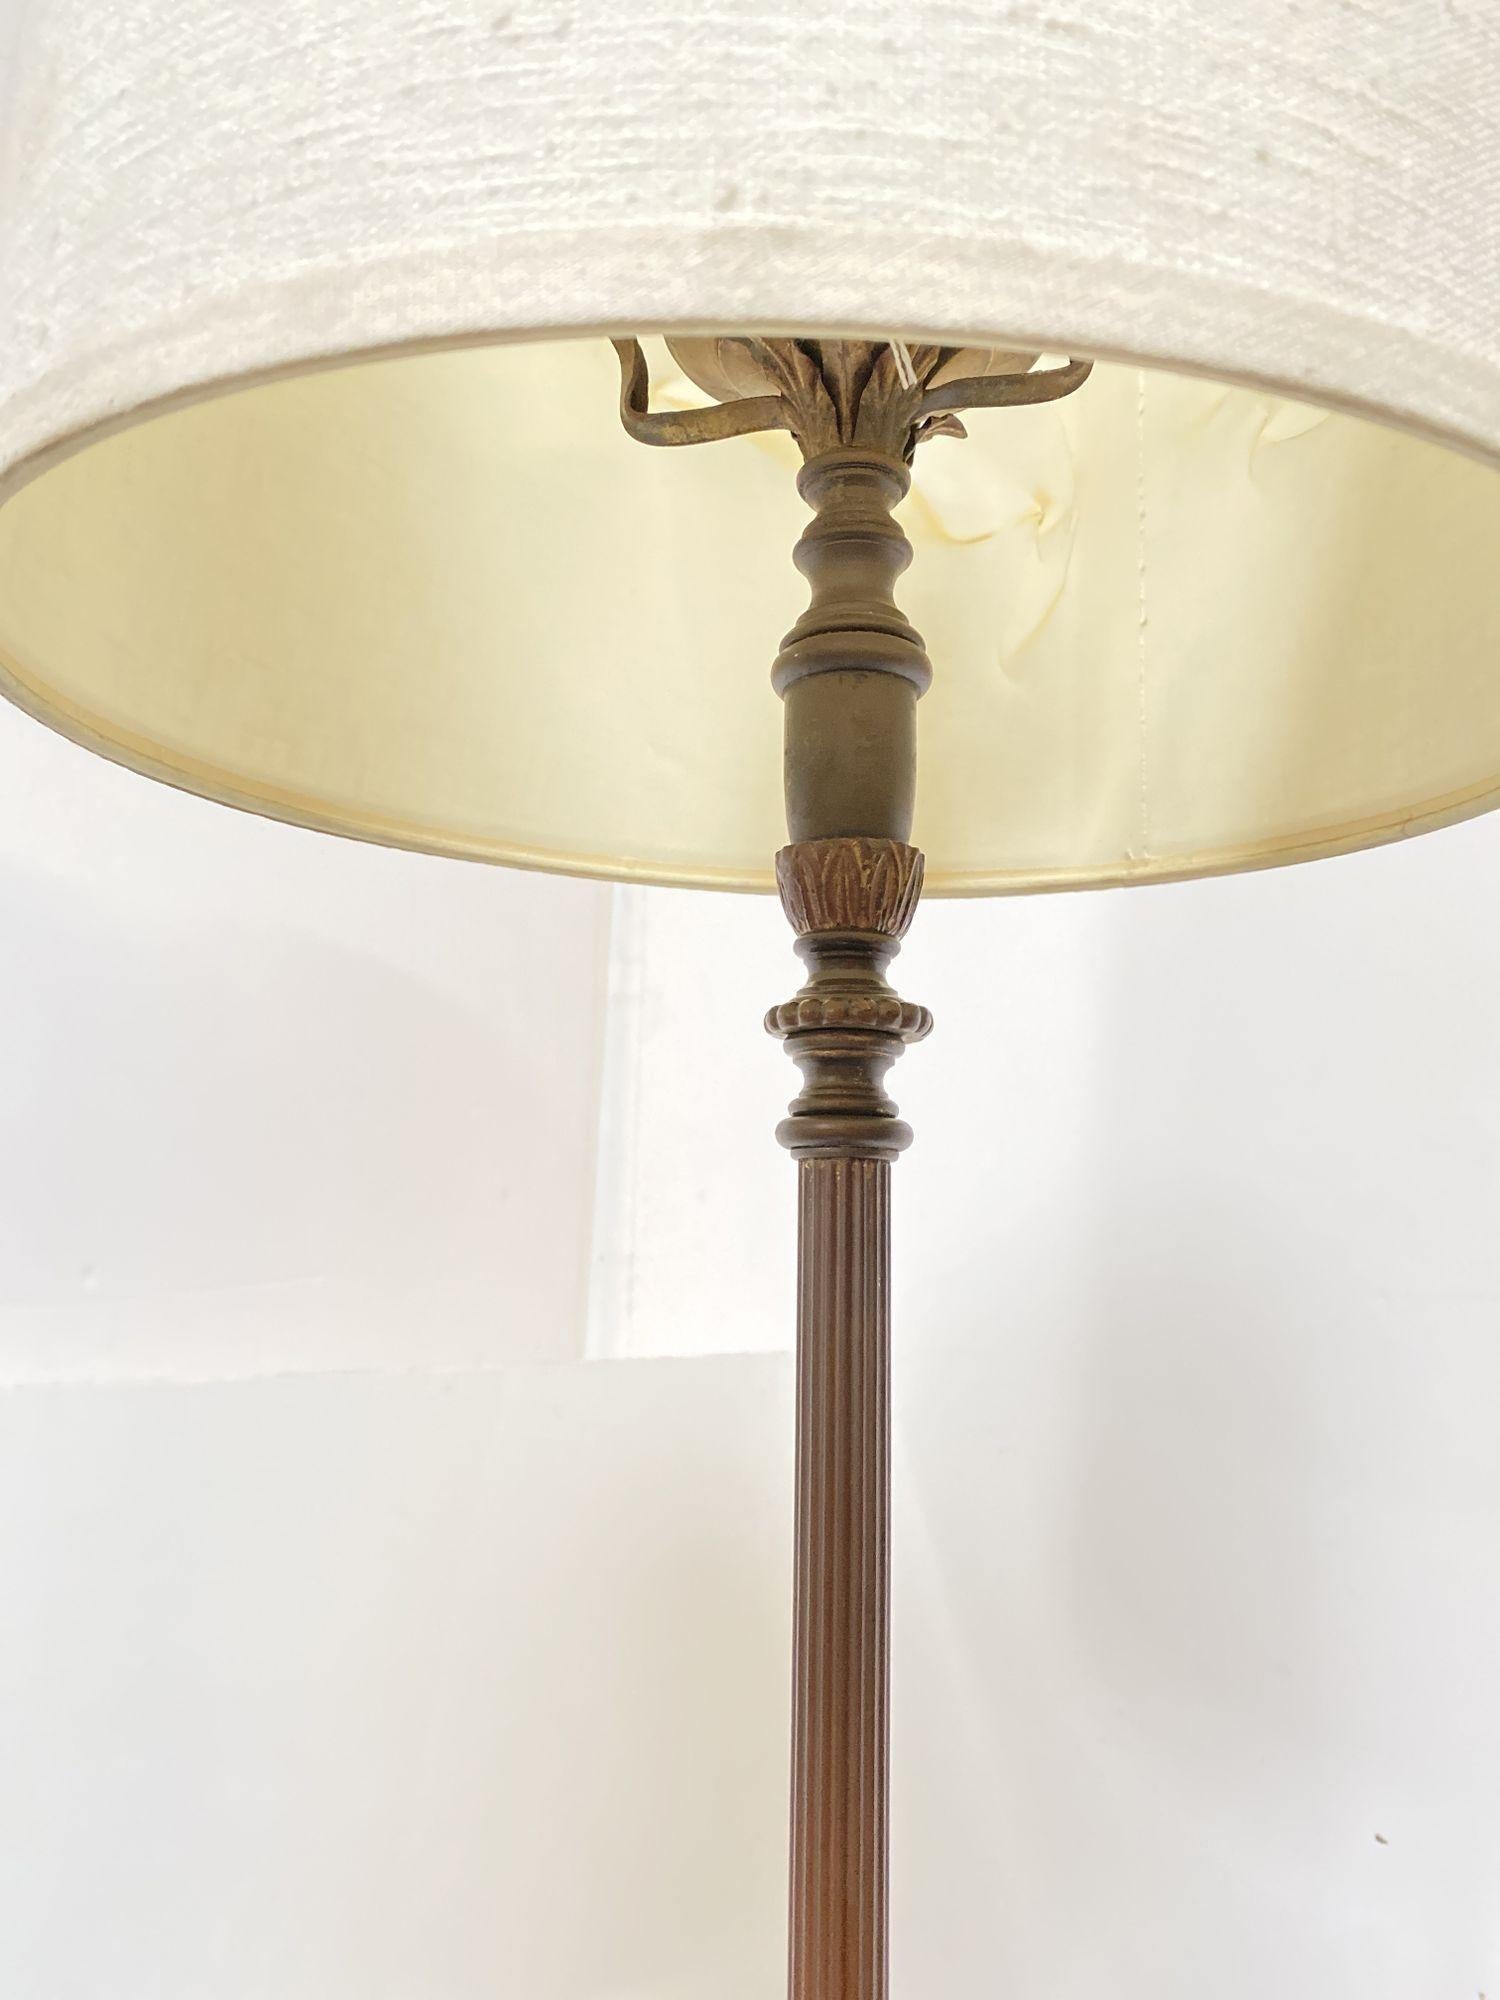 Regency brass floor with bottom marble accented base and fluted center column. The lamp comes with white shade.
 
Circa 1930